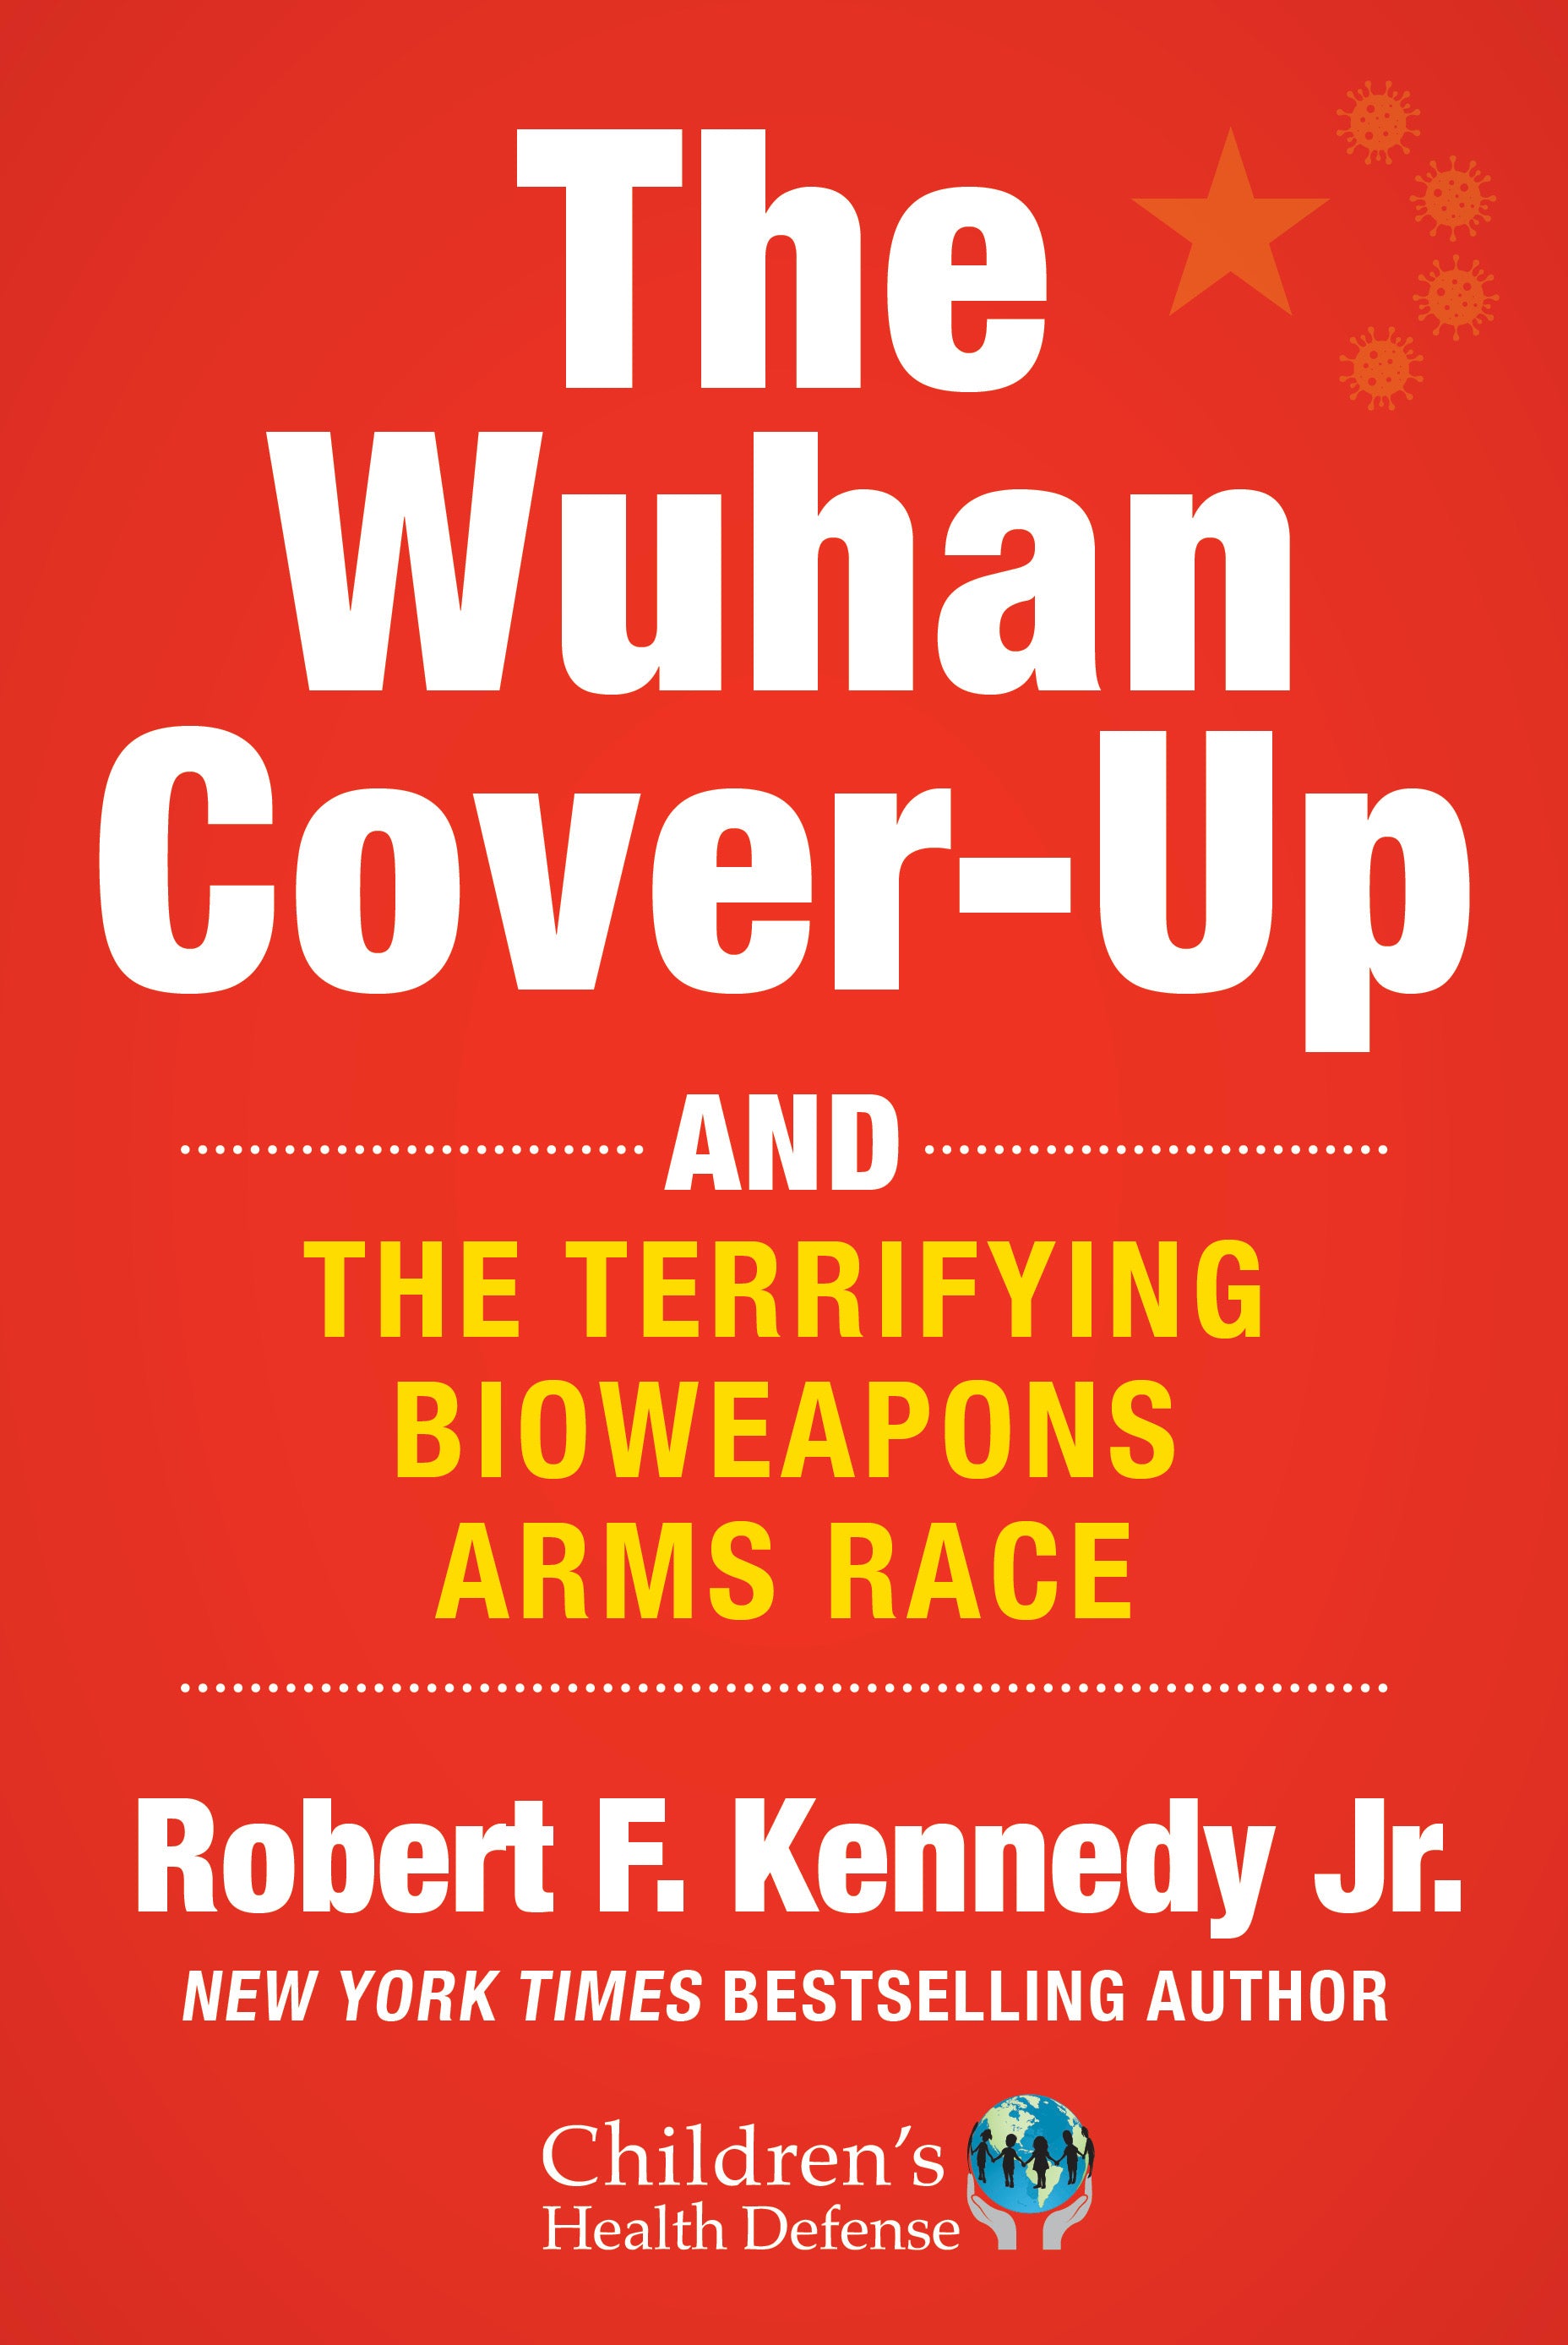 The Wuhan Cover-Up: And the Terrifying Bioweapons Arms Race (Digital File)